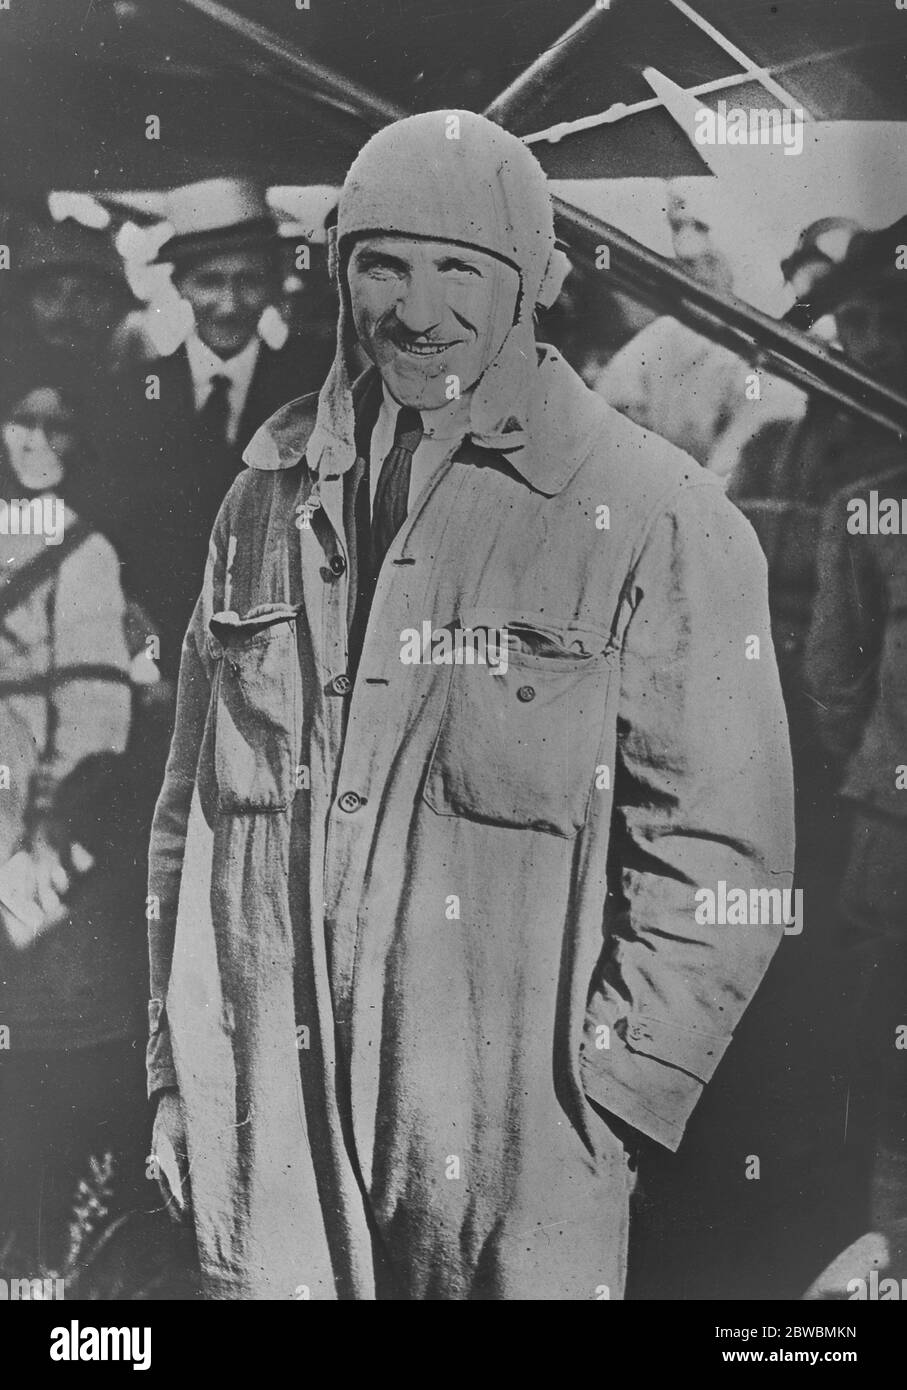 562 miles in 5 hours , Prague to Paris Flight Captain Demlin the rench airmen who accoplished succesfully a flight from Paris to Warsaw via Prague and back 28 May 1920 Stock Photo